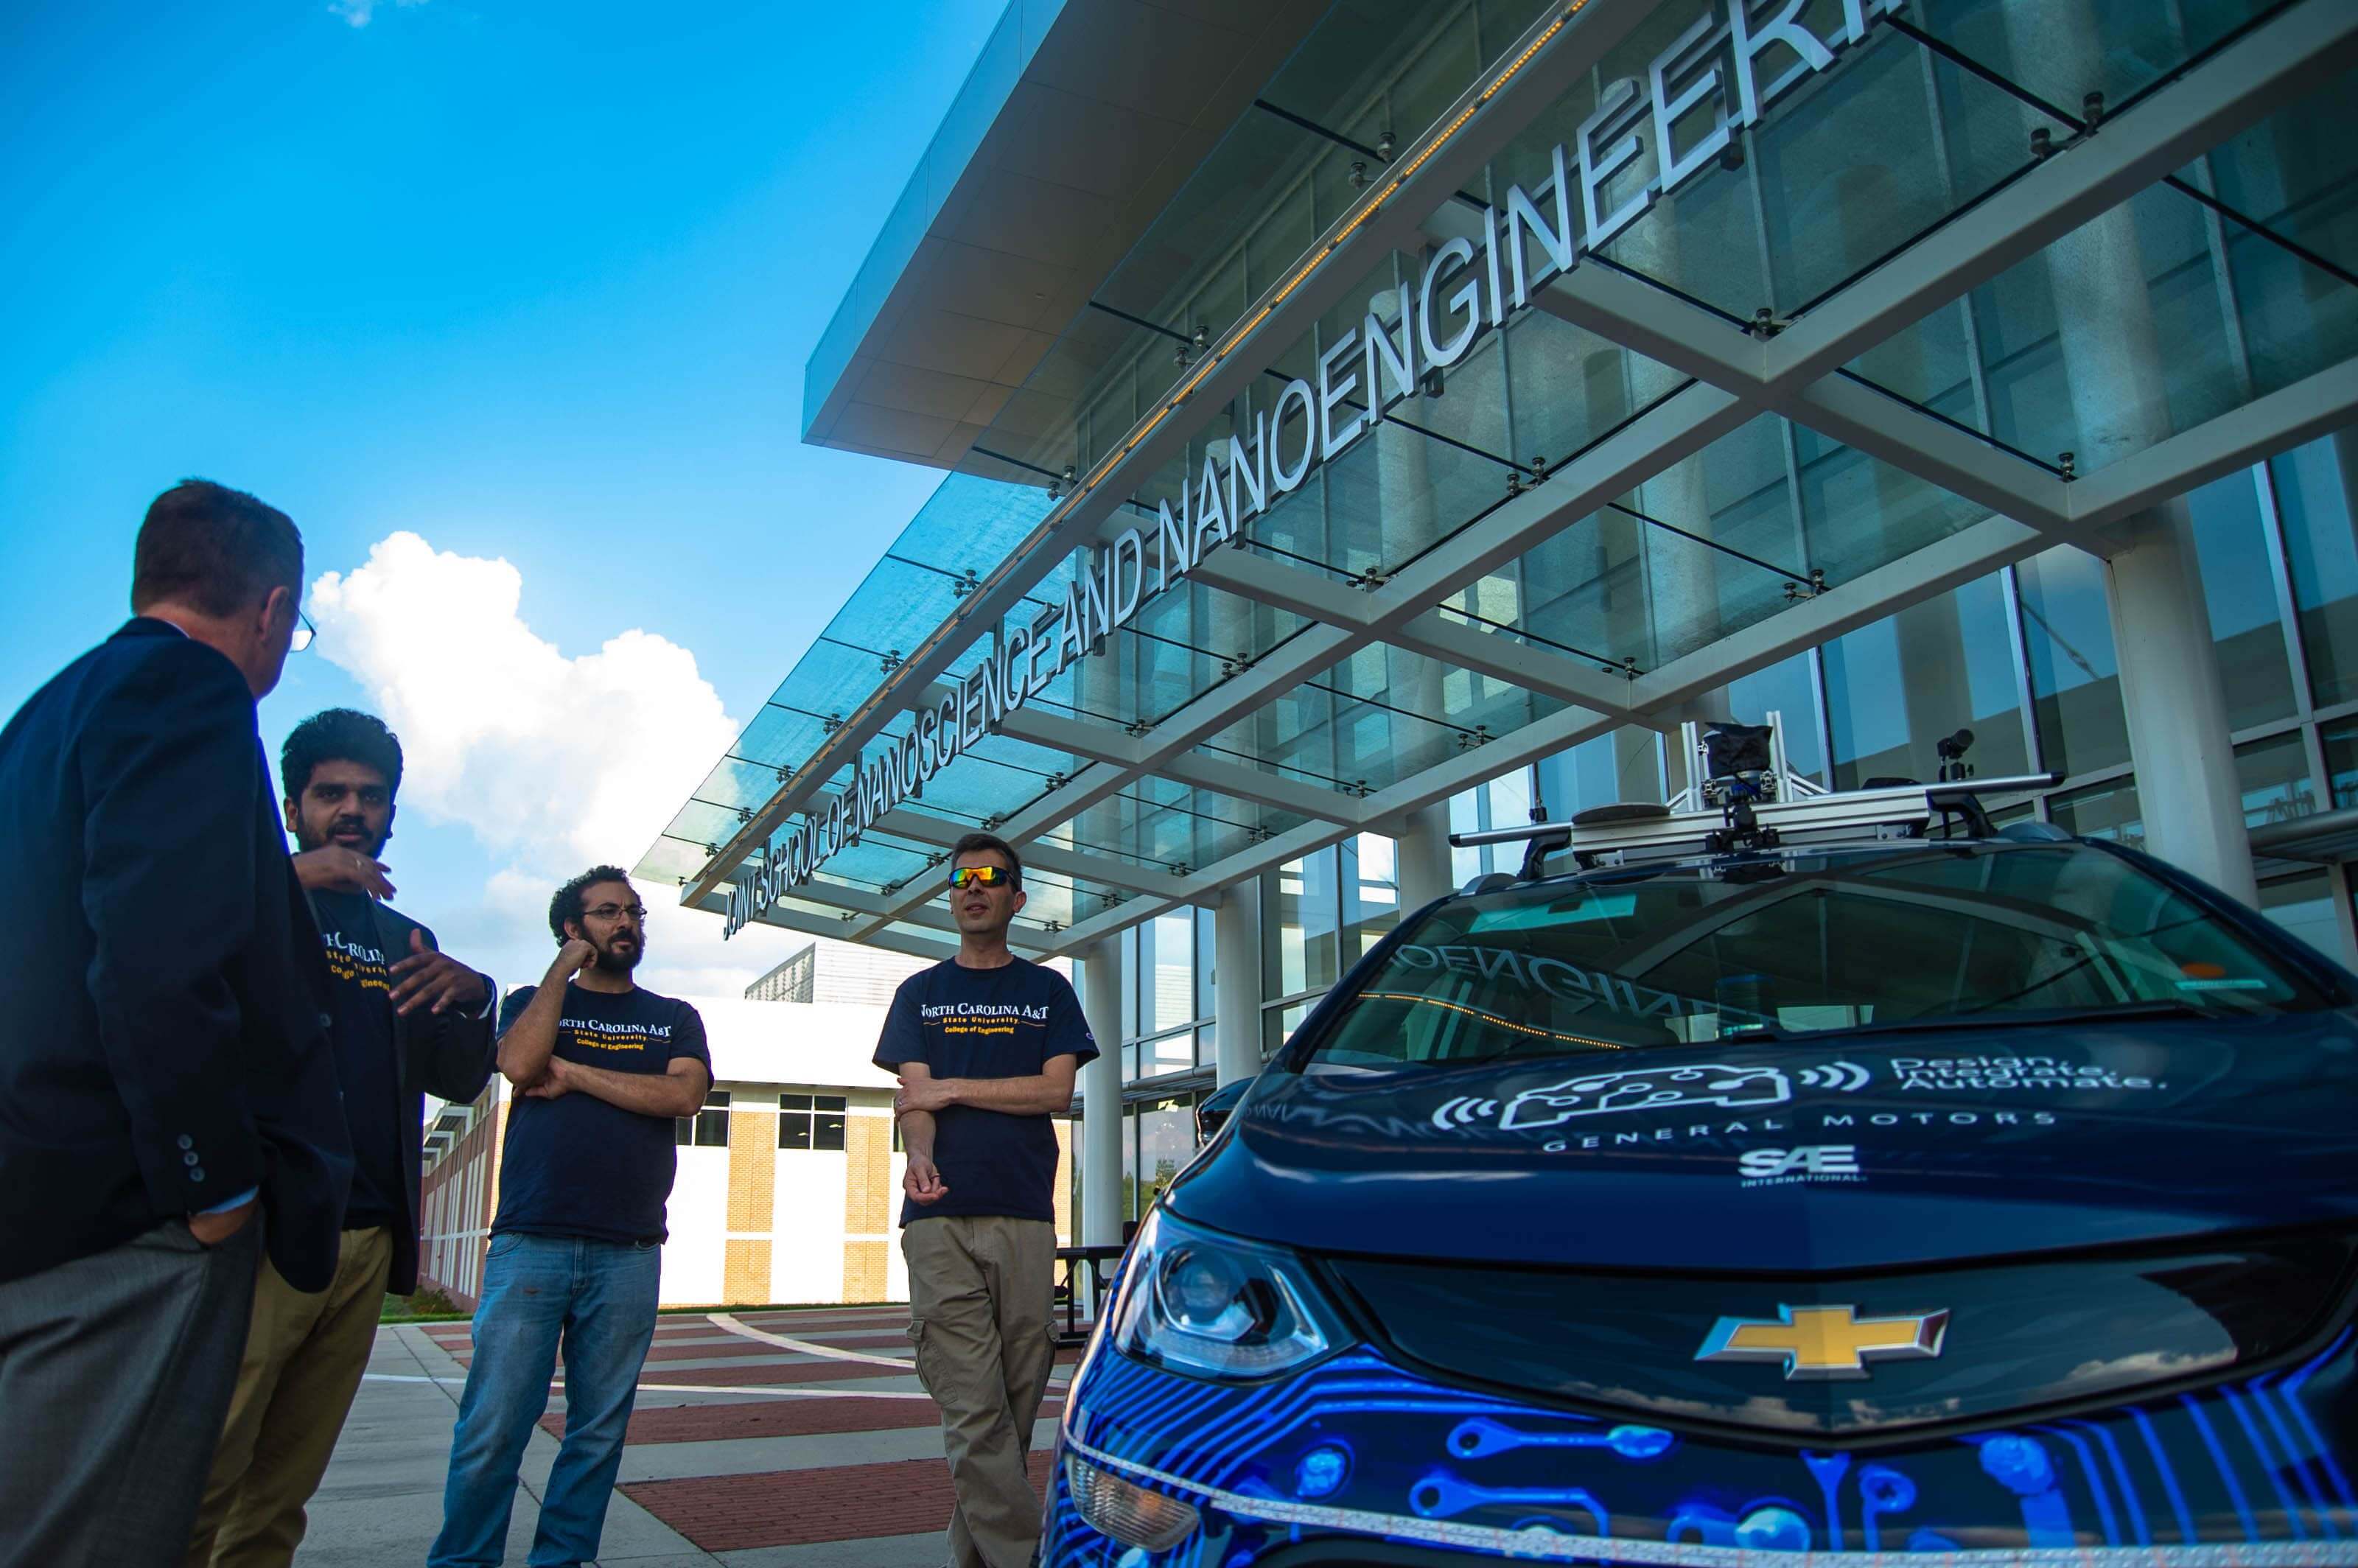 Four people stand outside a nanoscience and nanoengineering building, next to a car carrying equipment on its roof.